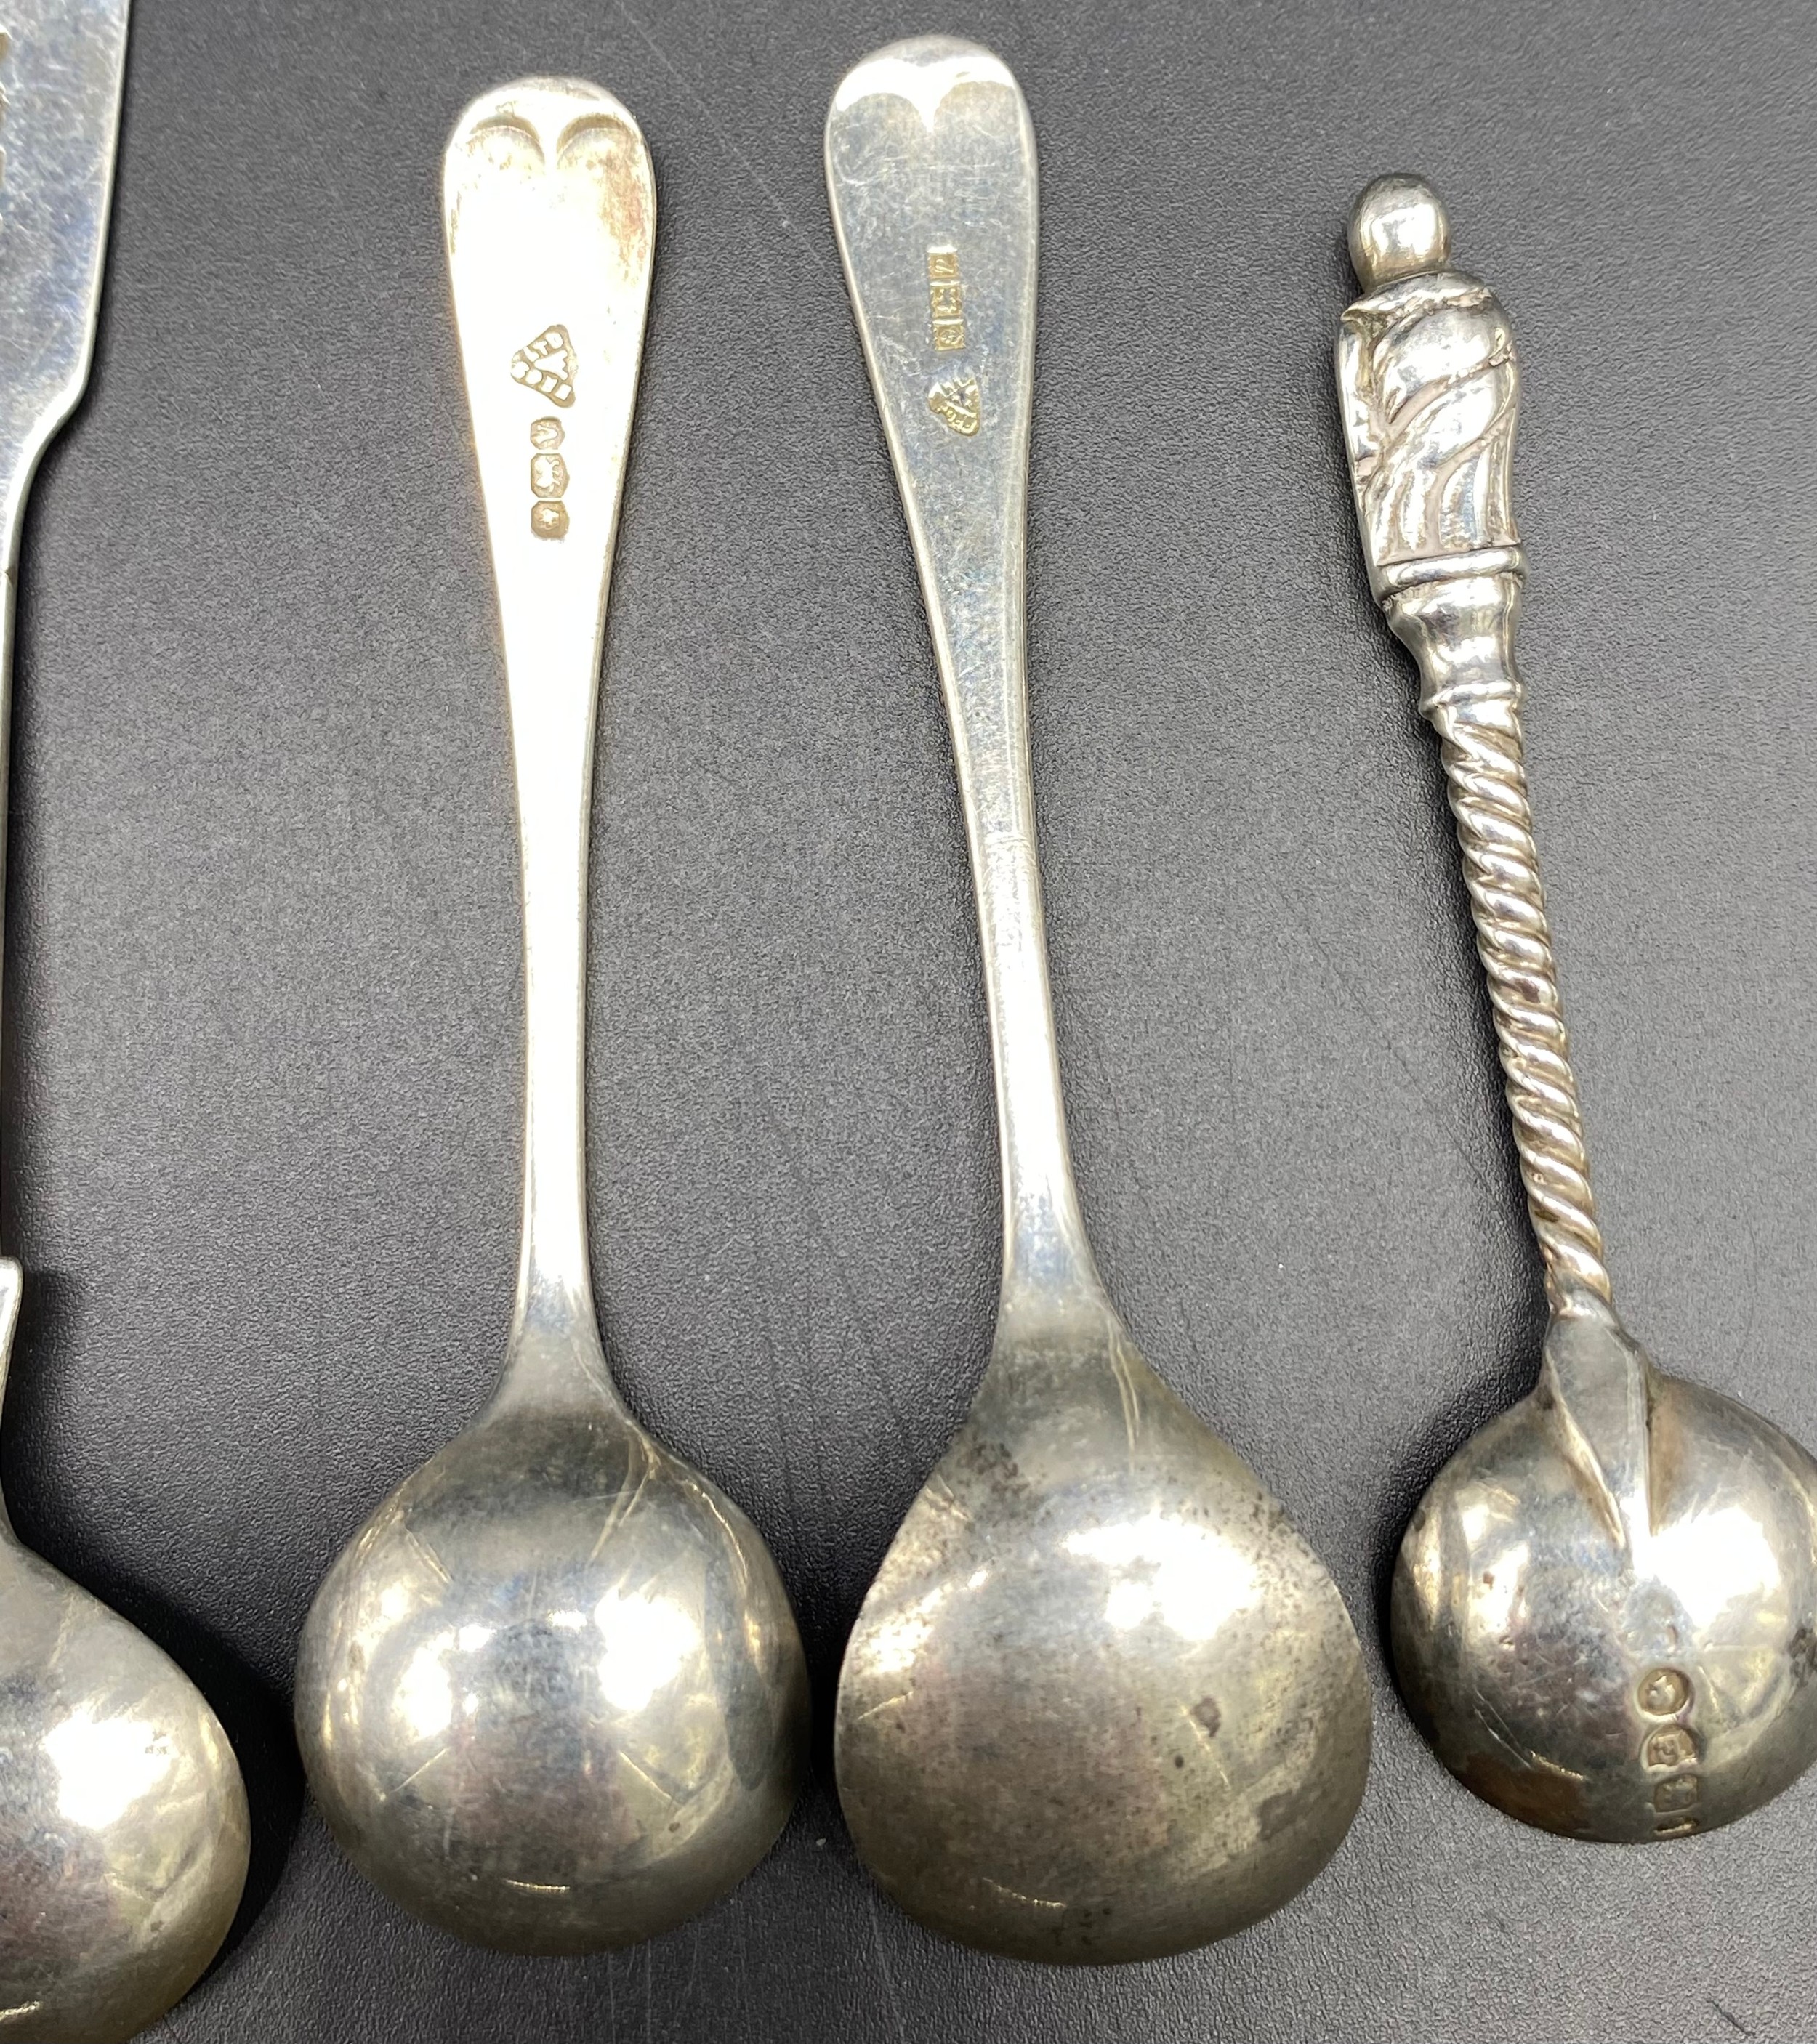 Silver hallmarked flat wares; spoons & fork [144.51] grams - Image 6 of 7